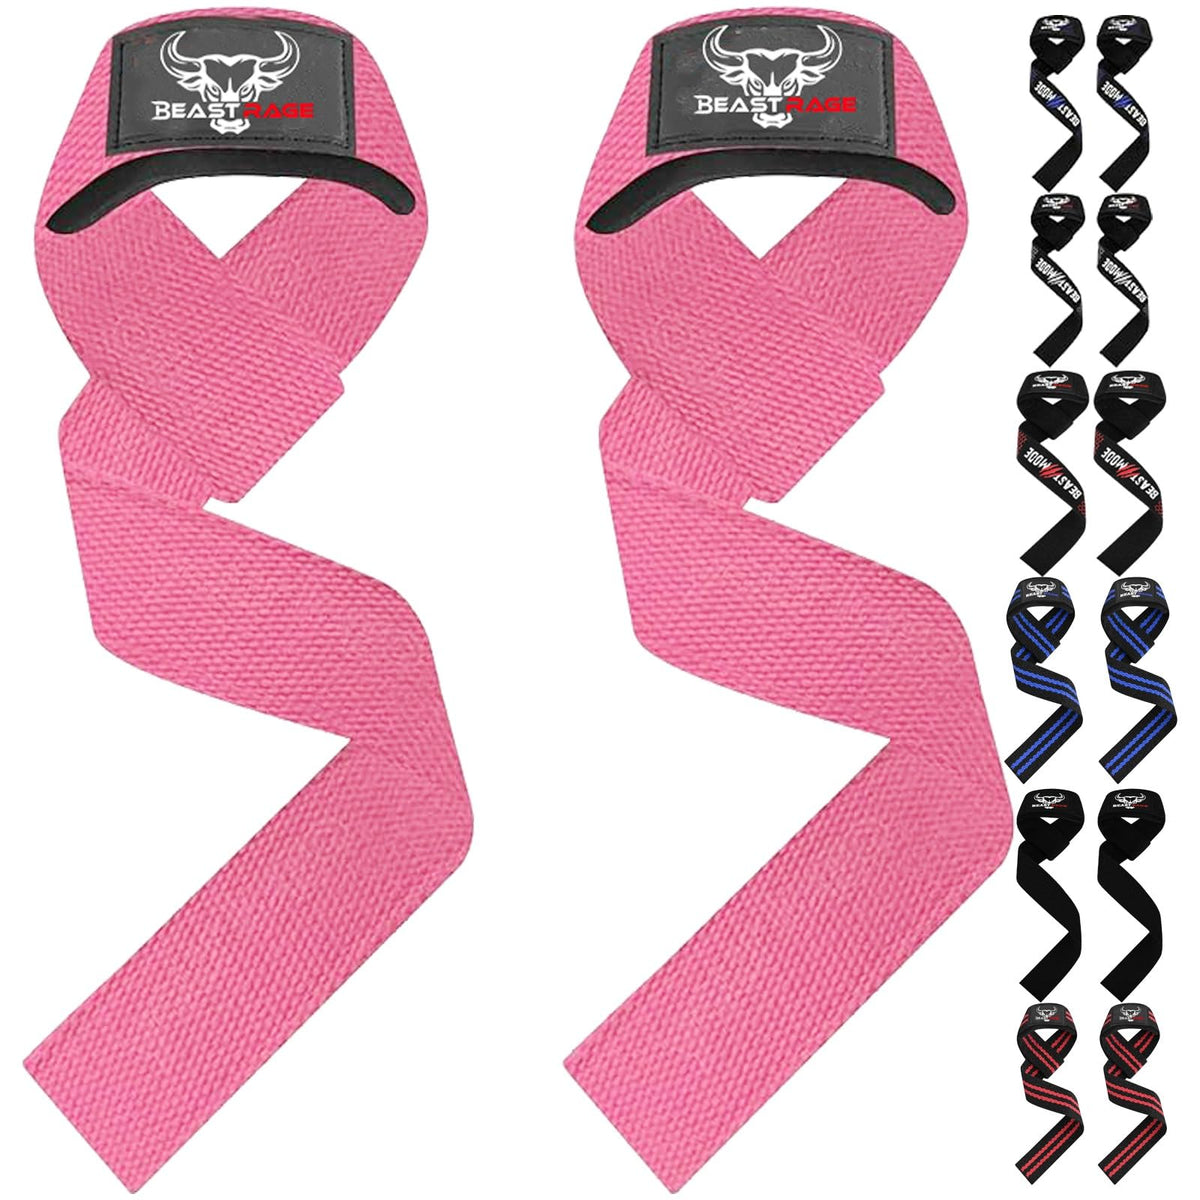 BEAST RAGE Weight Lifting Straps Fitness Padded Cotton Wrist Support Gel Advanced Grips Dumbbell Bar Wraps Heavy Duty Gym Bodybuilding Straps Power Deadlift Barbells Non Slip Exercise (T-Pink)